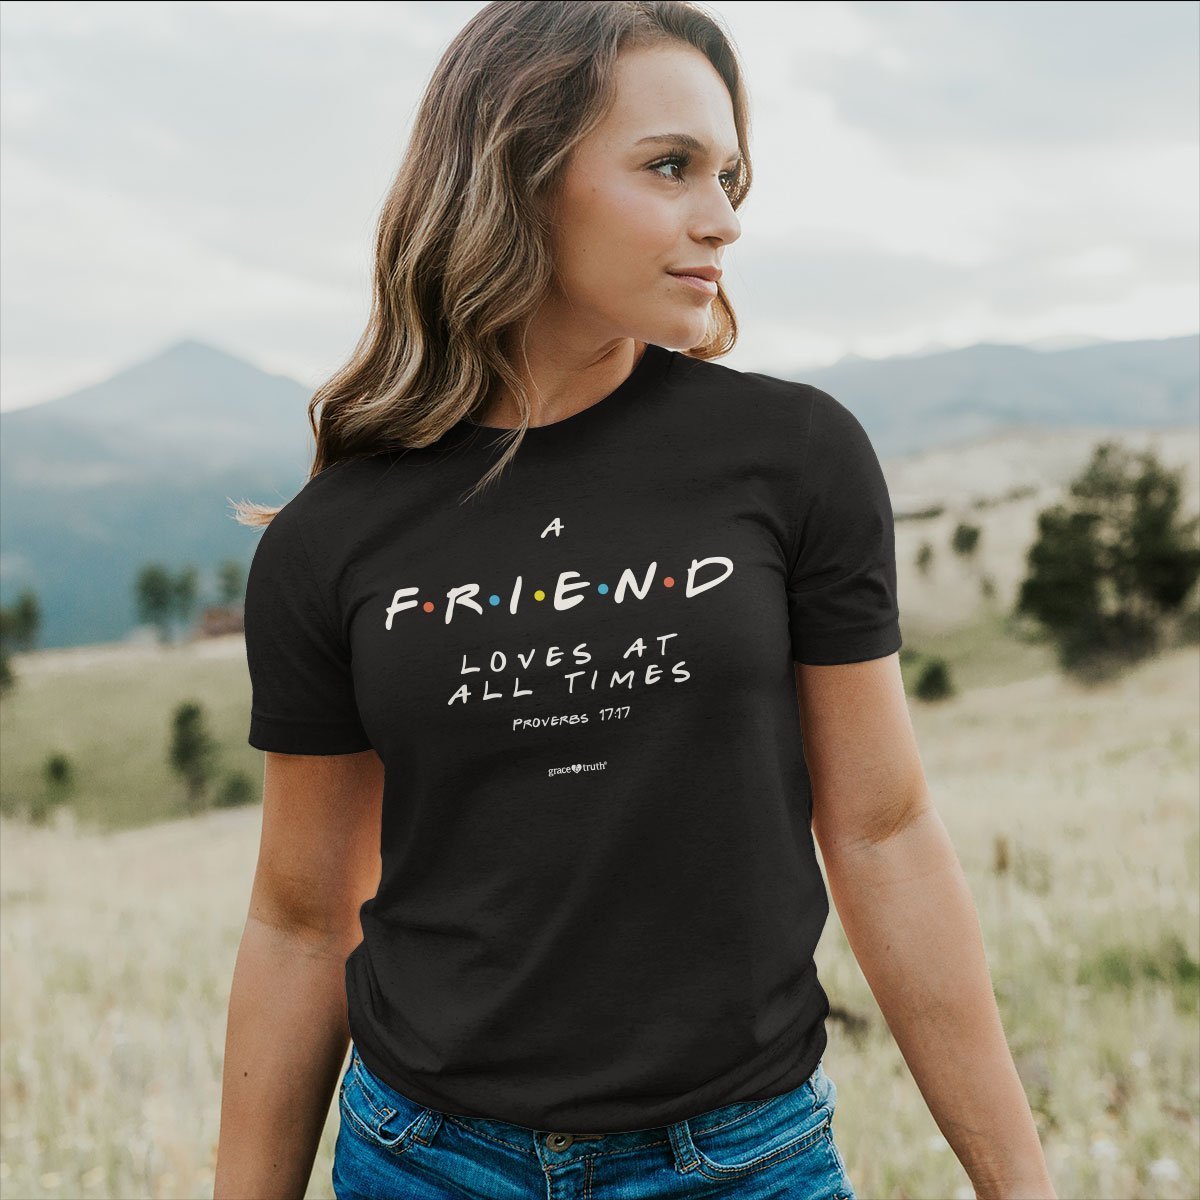 Cherished Girl Grace & Truth A Friend Loves at All Times Friends Girlie Christian Bright T Shirt